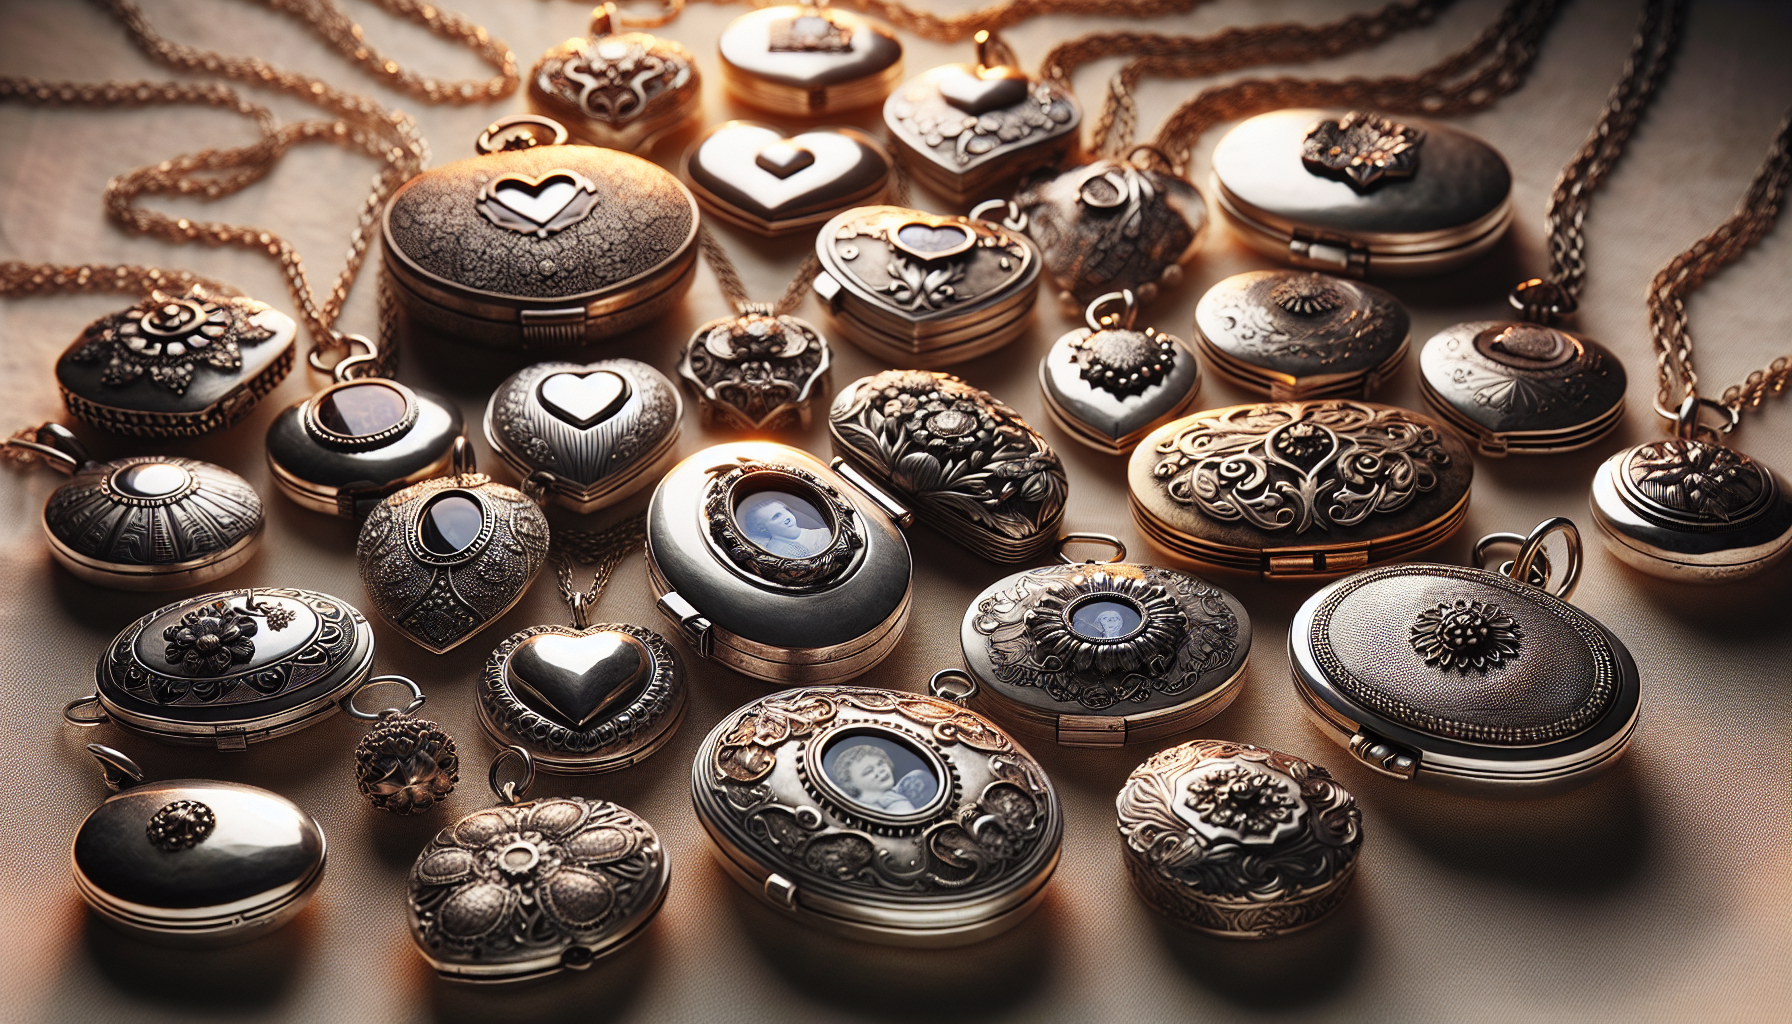 A long-lasting tradition in jewellery-making, silver lockets have consistently appealed to all types of admirers. Imagine an exquisite array of vintage silver lockets, laid out for exploration, each c